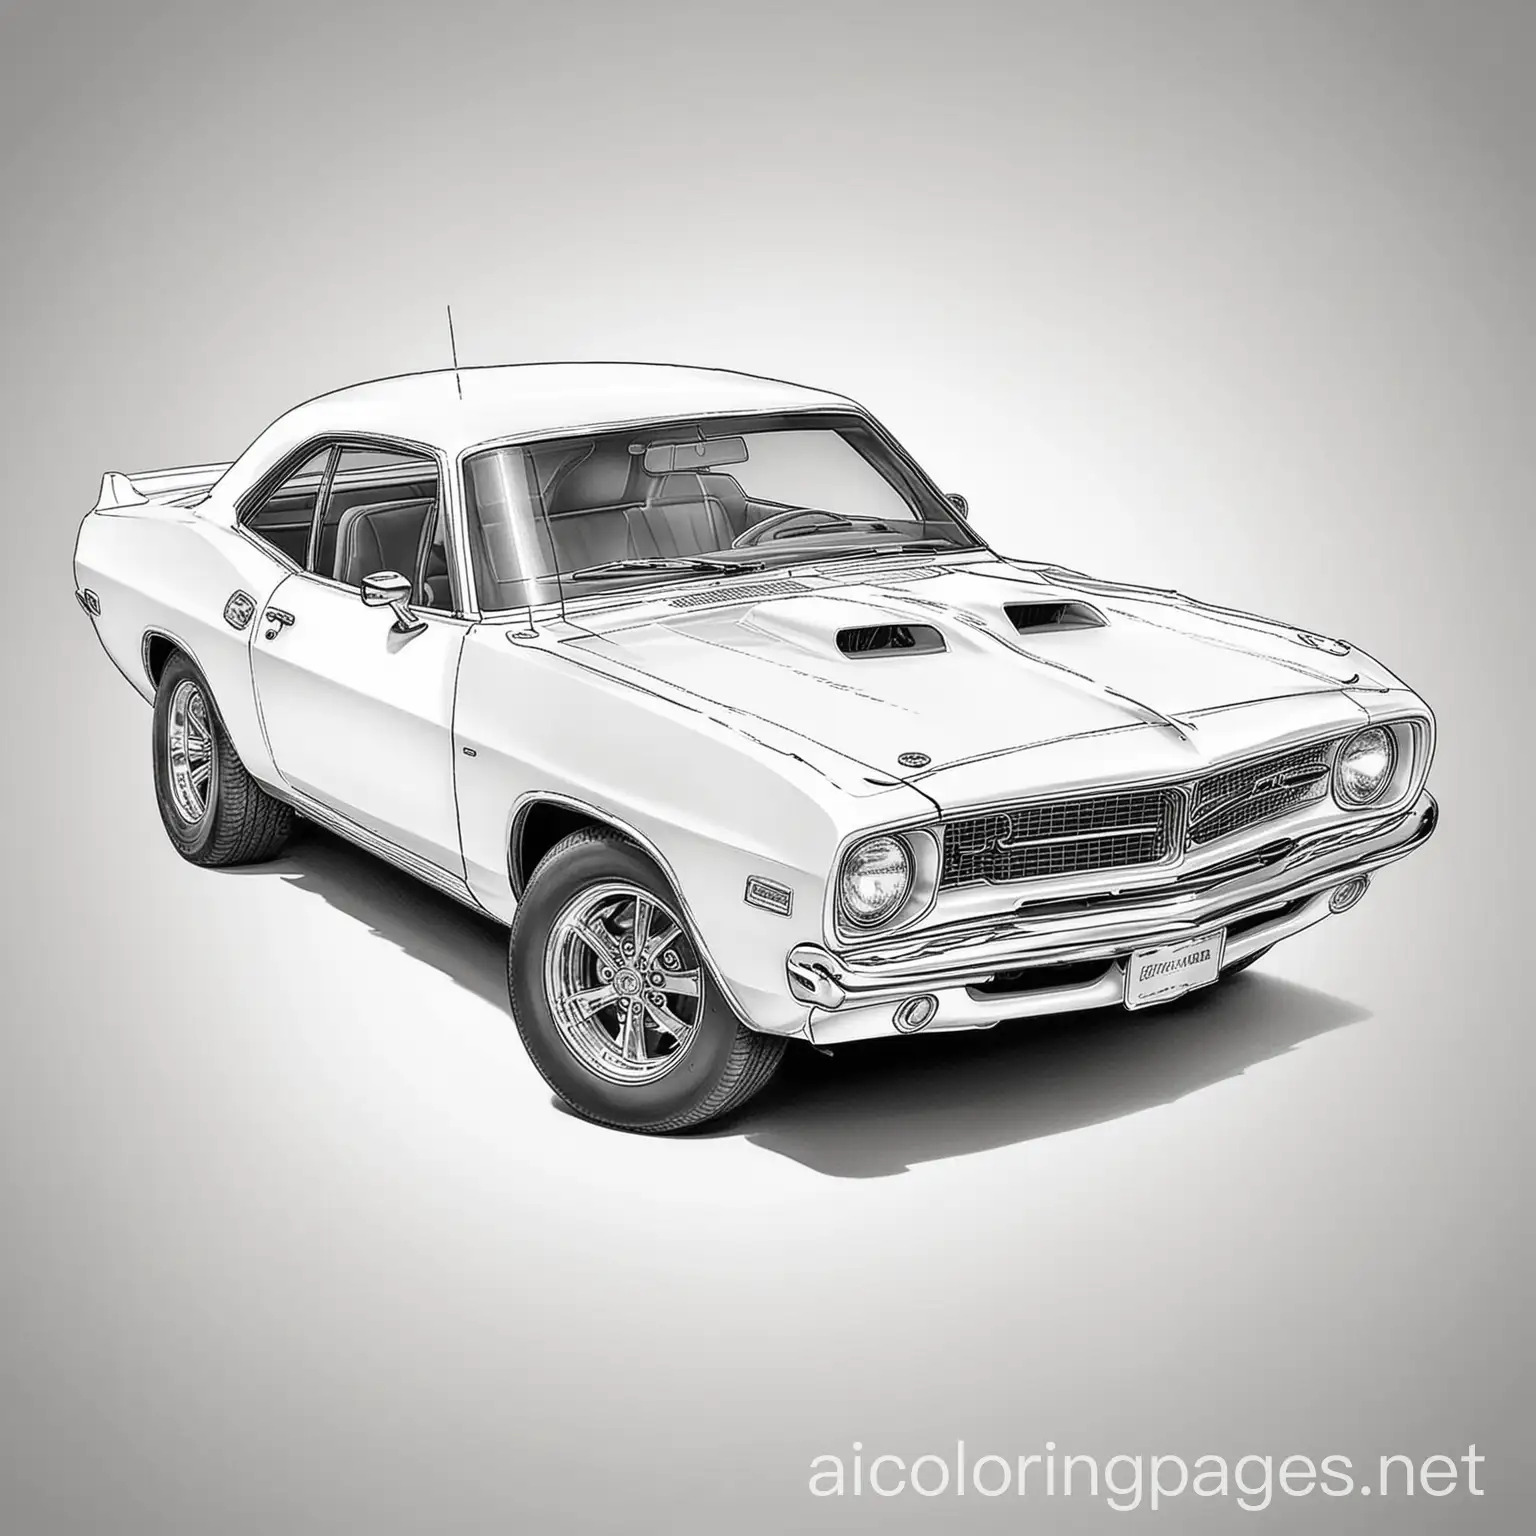 Plymouth Hemi Barracuda coloring page, Coloring Page, black and white, line art, white background, Simplicity, Ample White Space. The background of the coloring page is plain white to make it easy for young children to color within the lines. The outlines of all the subjects are easy to distinguish, making it simple for kids to color without too much difficulty